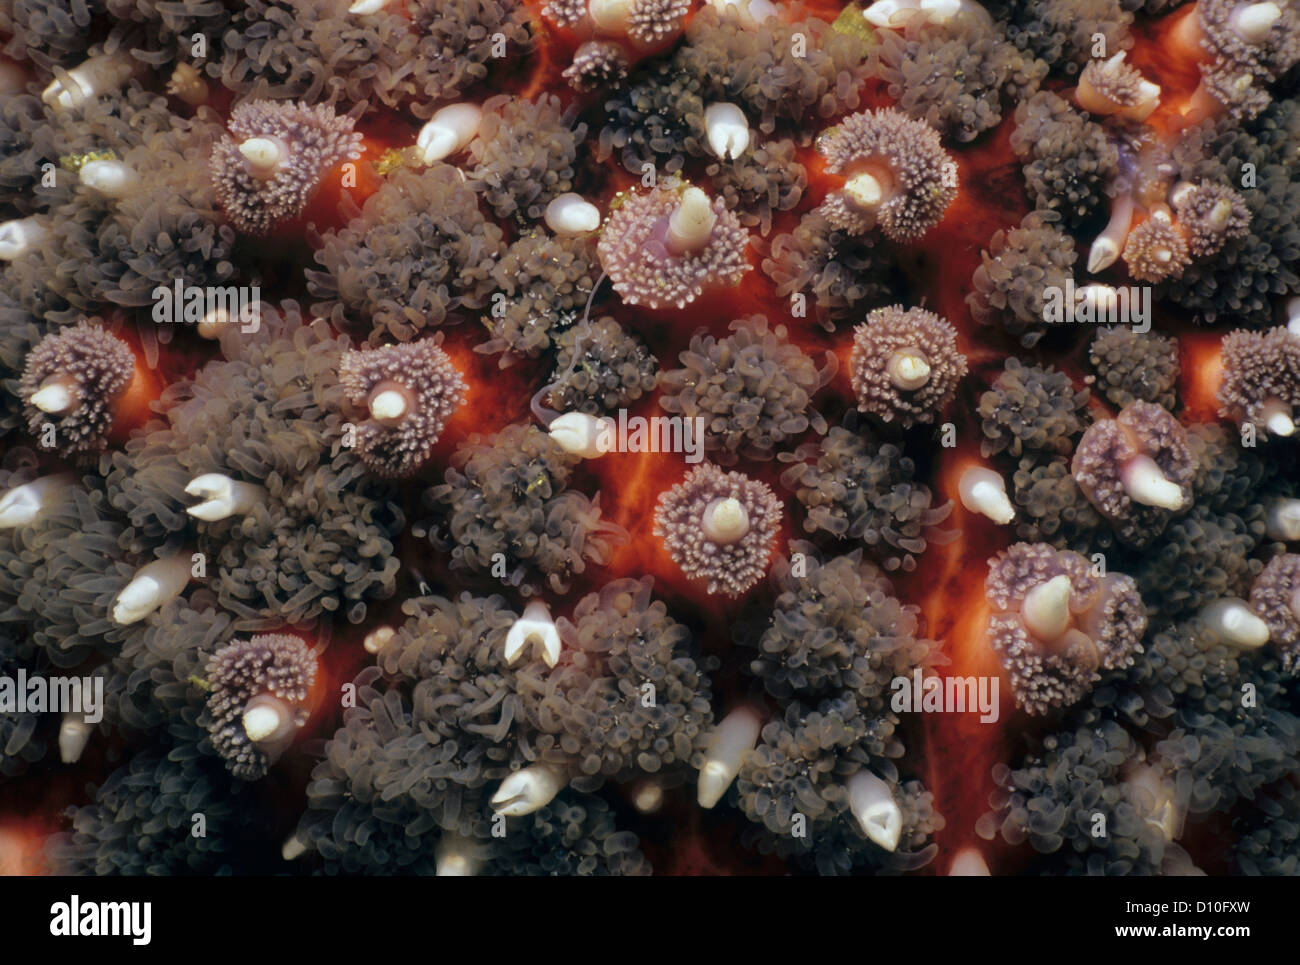 Close-up of Sunflower Sea Star (Pyenopodia helianthoides). Queen Charlotte Strait, British Columbia, Canada, North Pacific Ocean Stock Photo